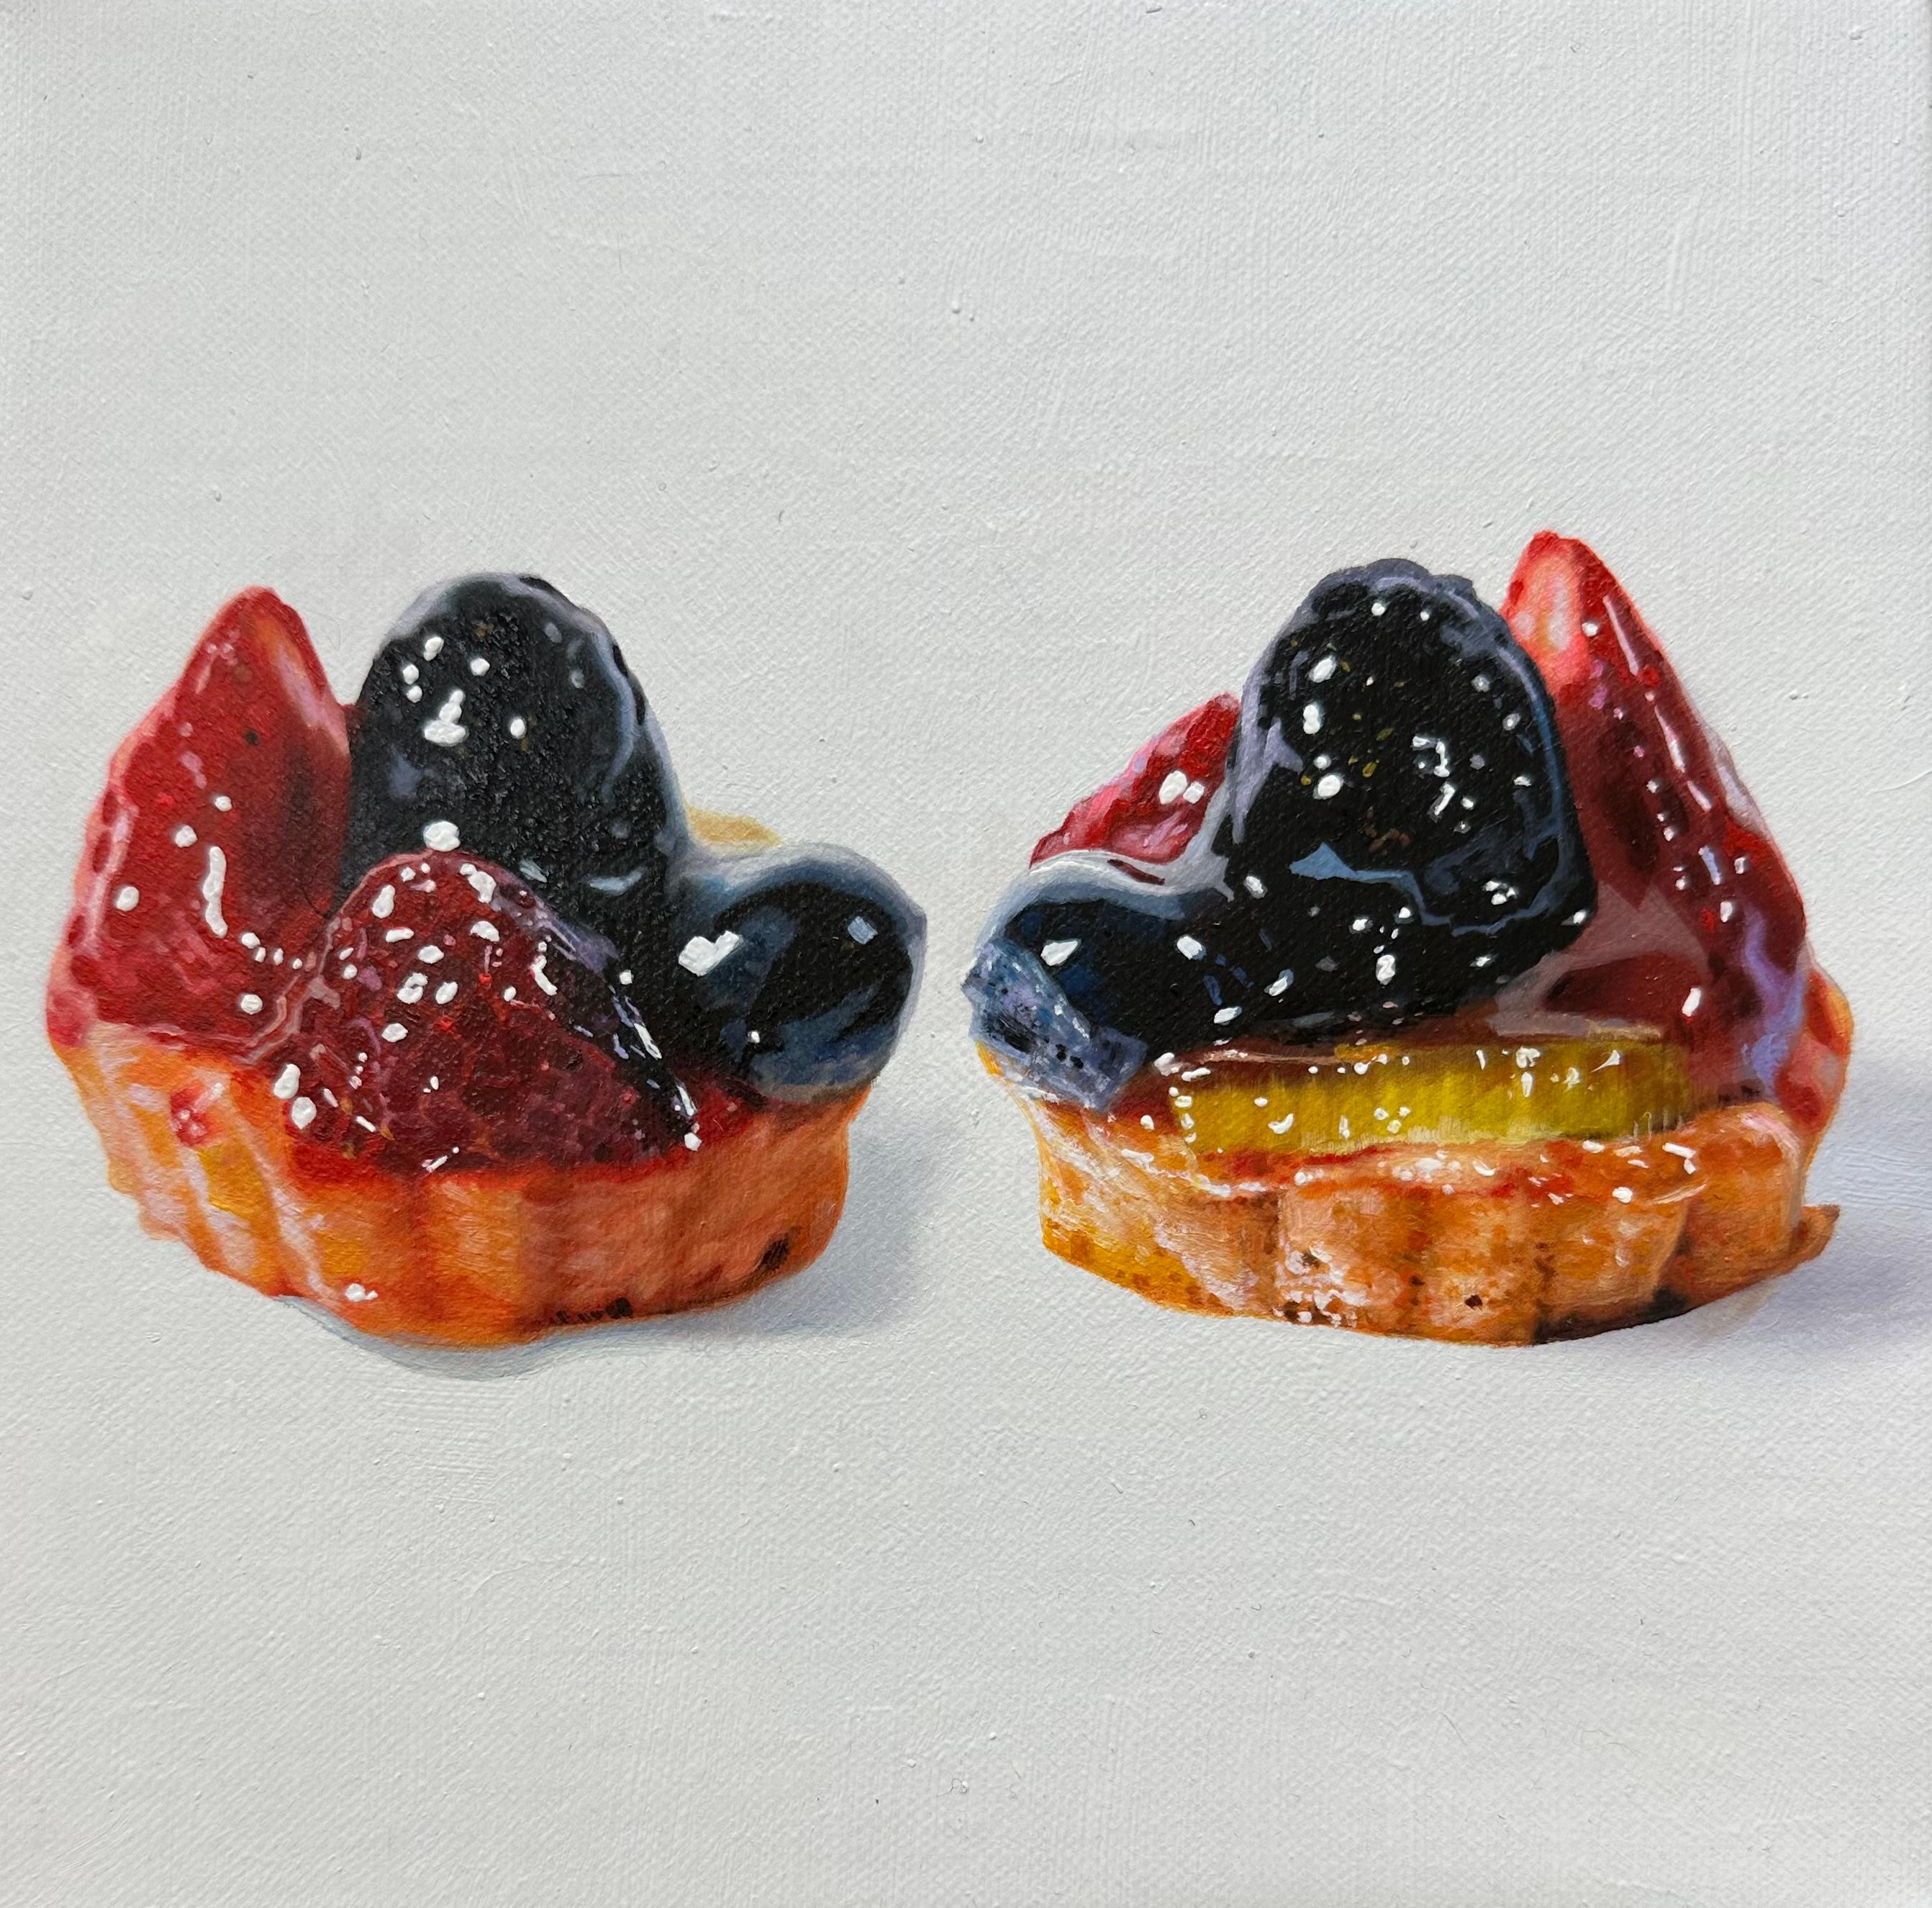 Two Fruit Tarts with a Single Hair